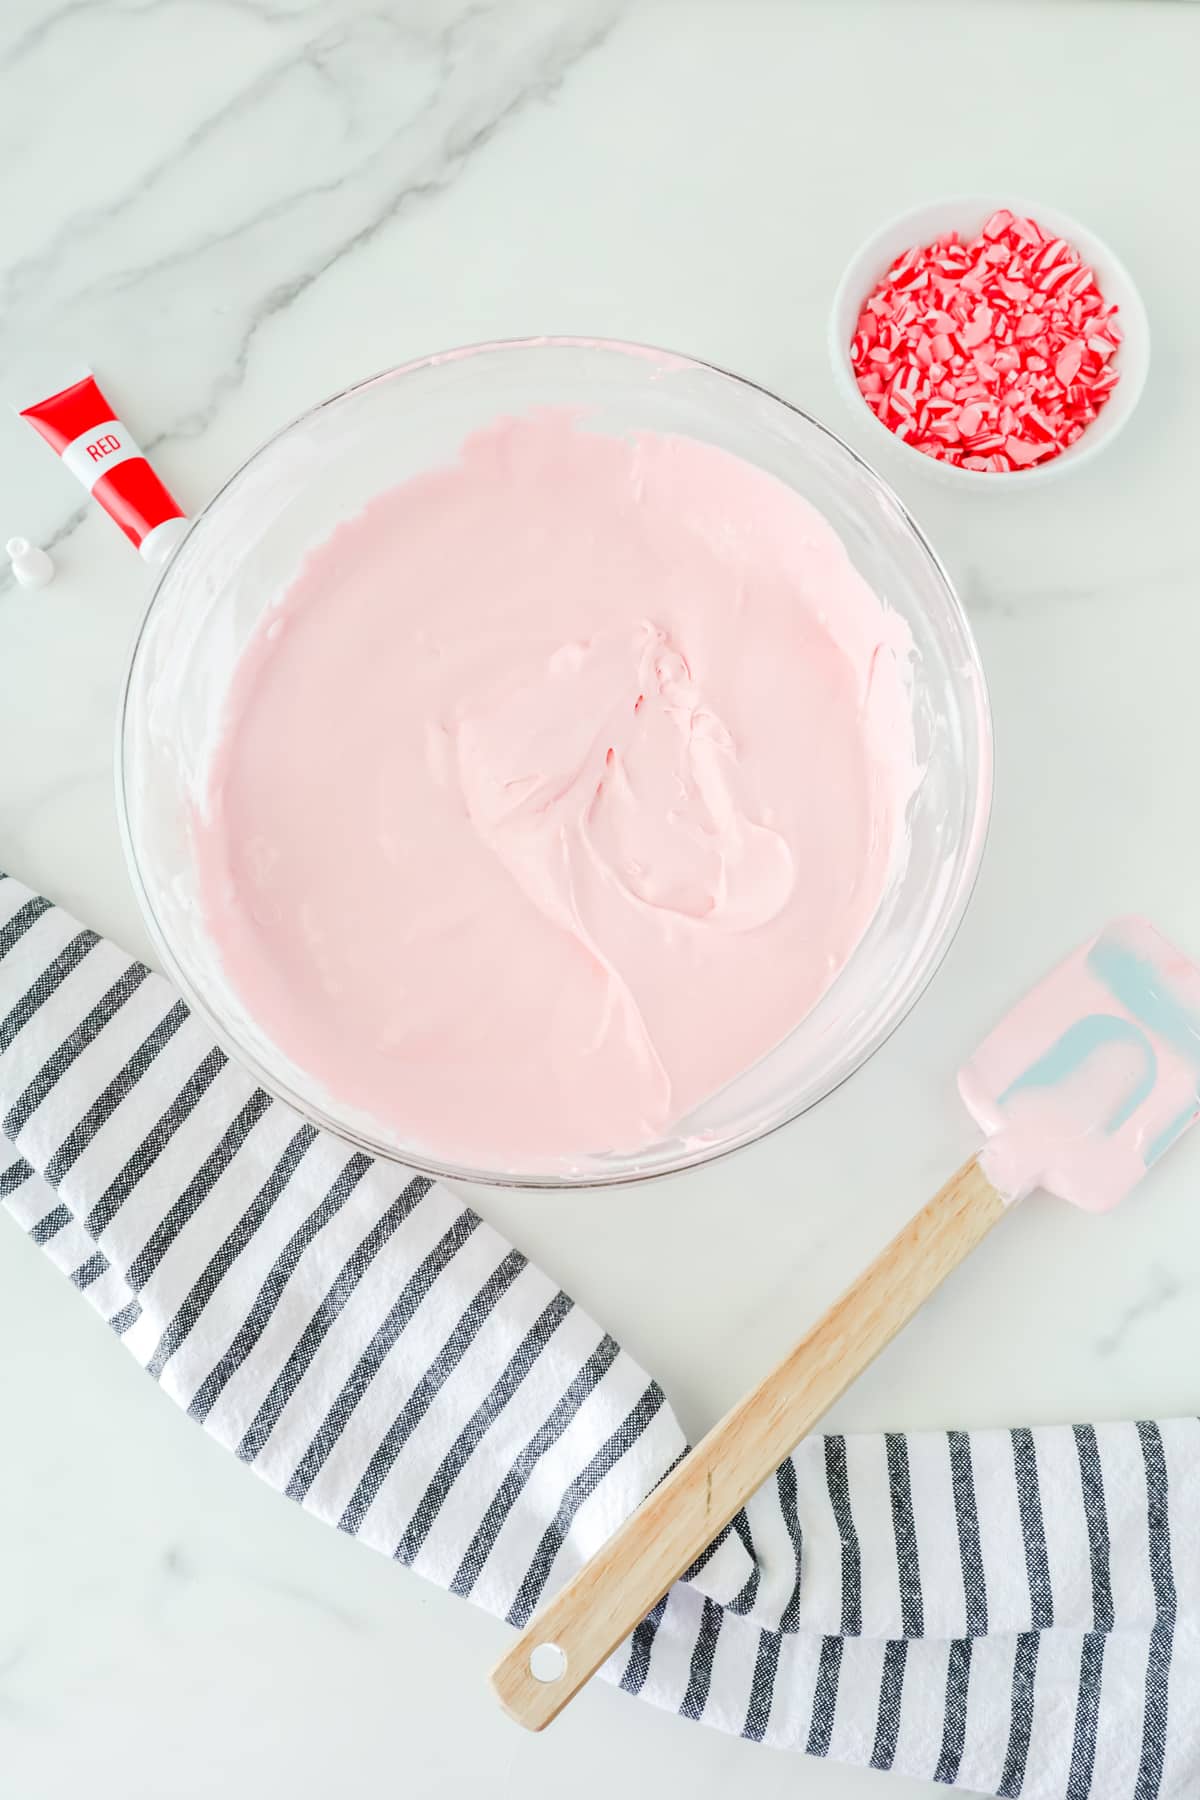 Next step in making Peppermint Fluff is to add drops of red coloring to the mixture.